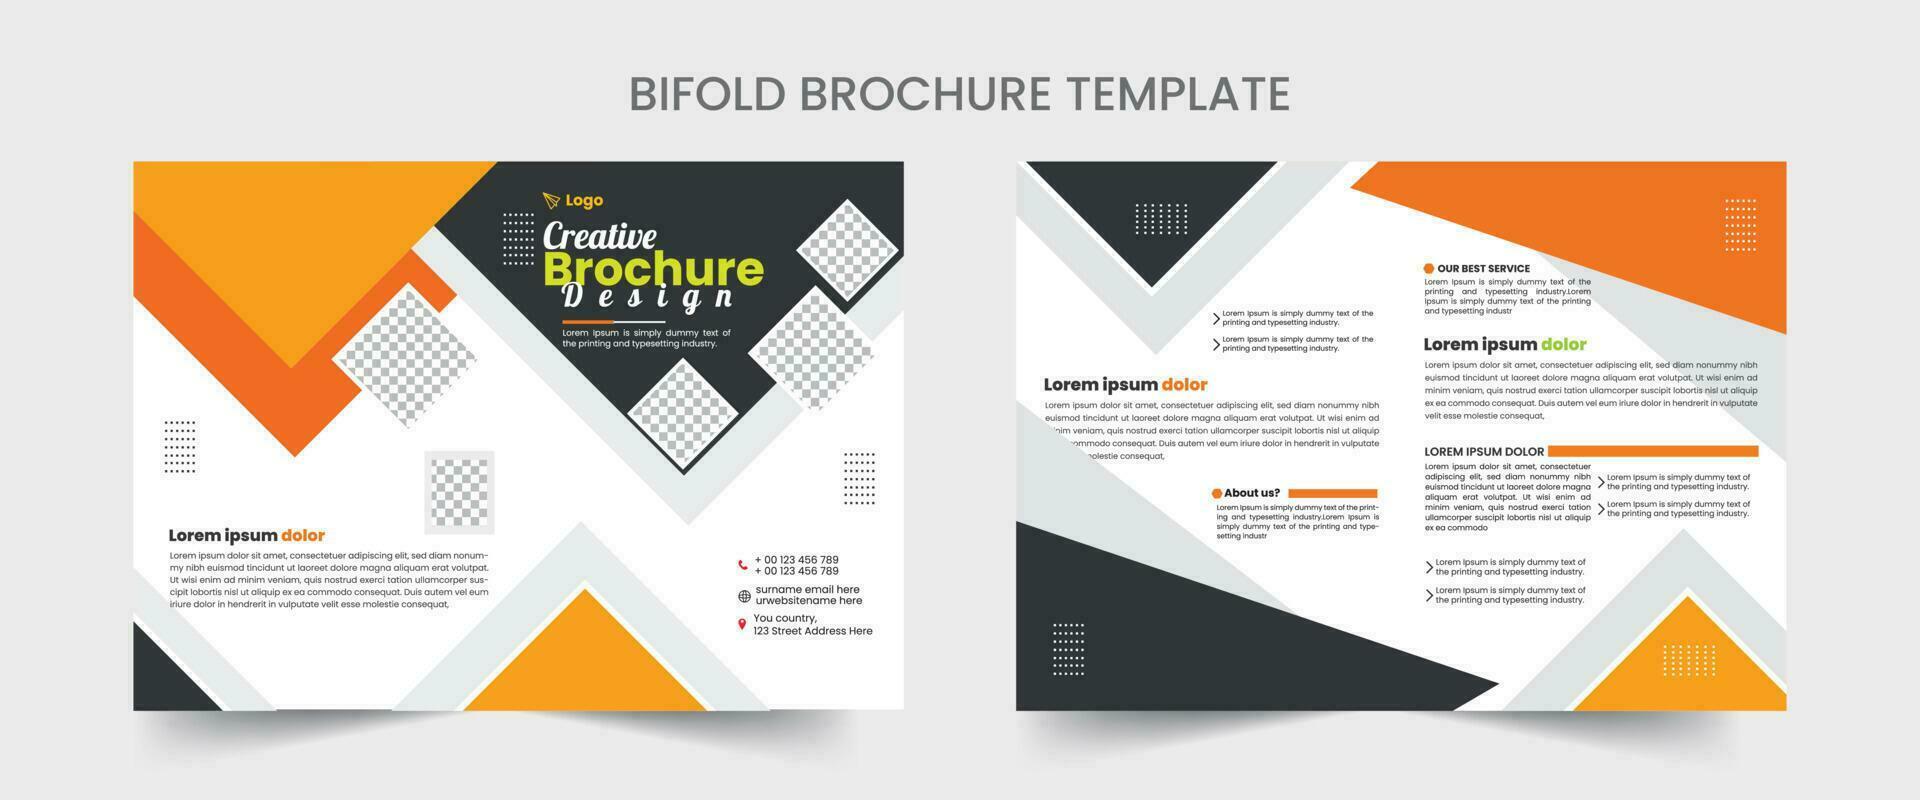 Bi fold Brochure Design Template for your Company with minimal and modern shapes in A4 format. vector